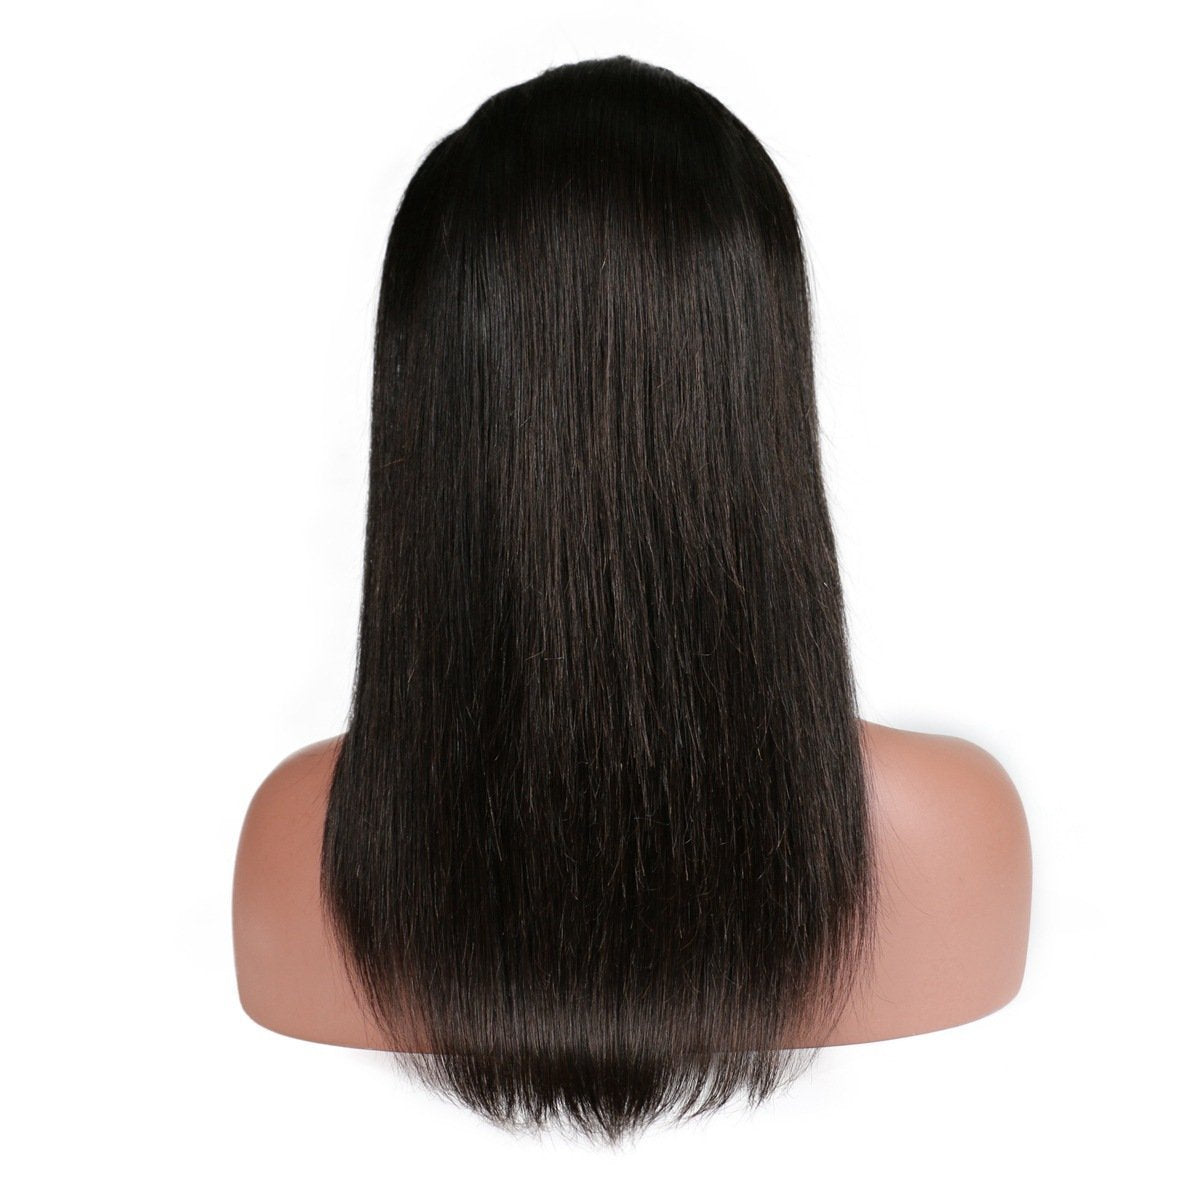 Lush Locks  Hair Lace Front Wigs Human Hair Wigs for  Women 150% Density Pre Plucked with Baby Hair Natural Color